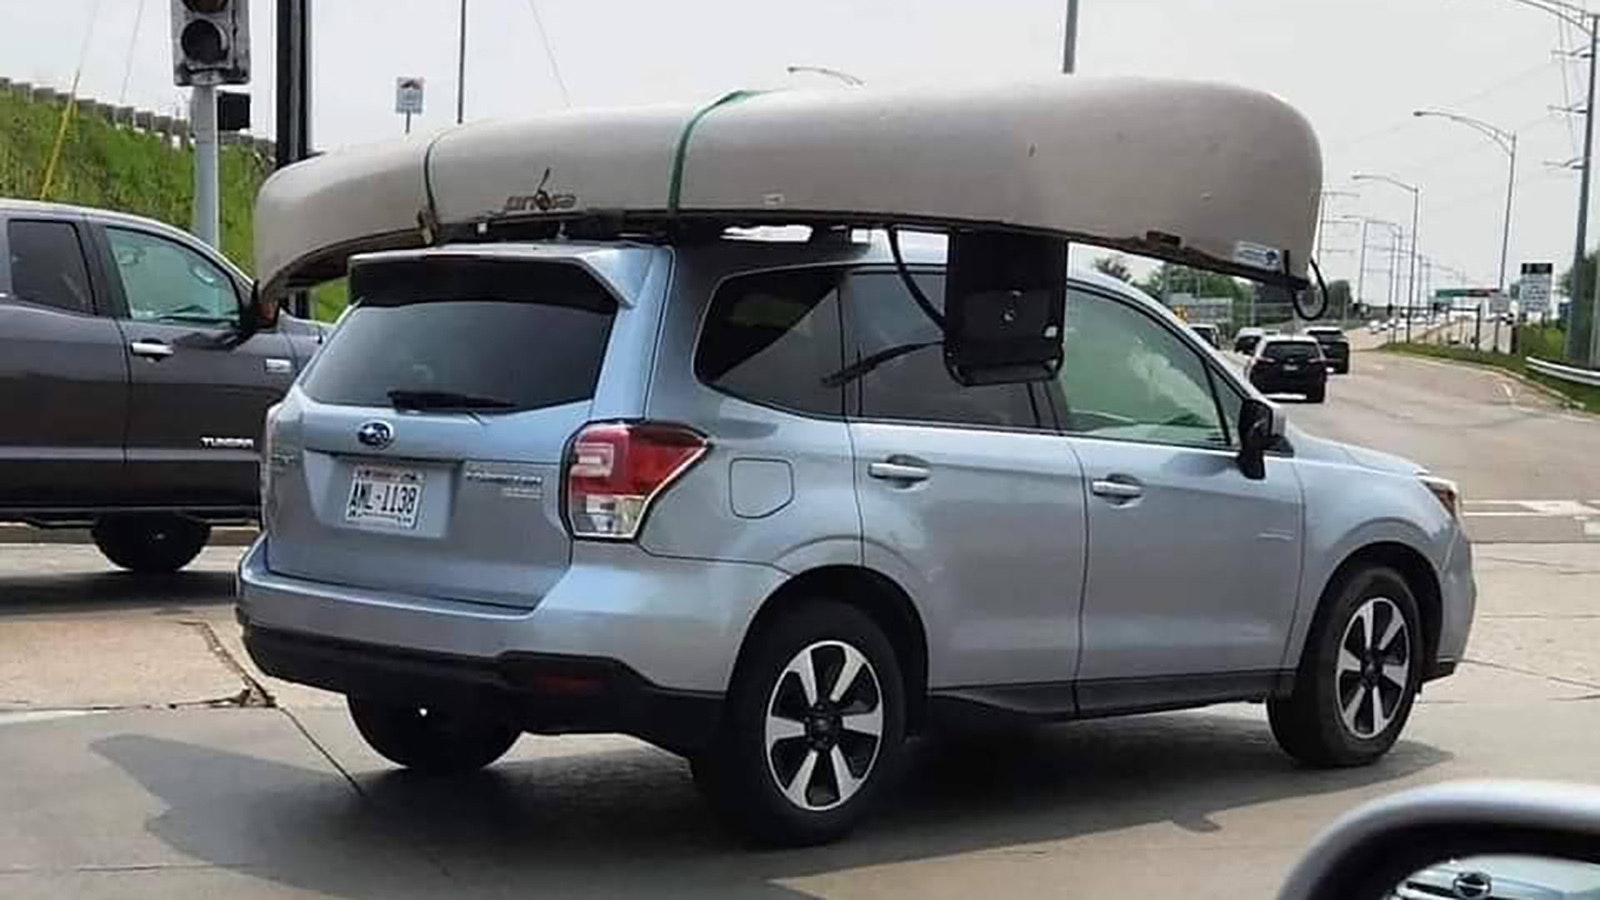 Jen Mignard, founder of the "Yellowstone National Park: Invasion of the Idiots" Facebook page couldn't believe it when she saw this canoe strapped sideways on top of a Subaru.